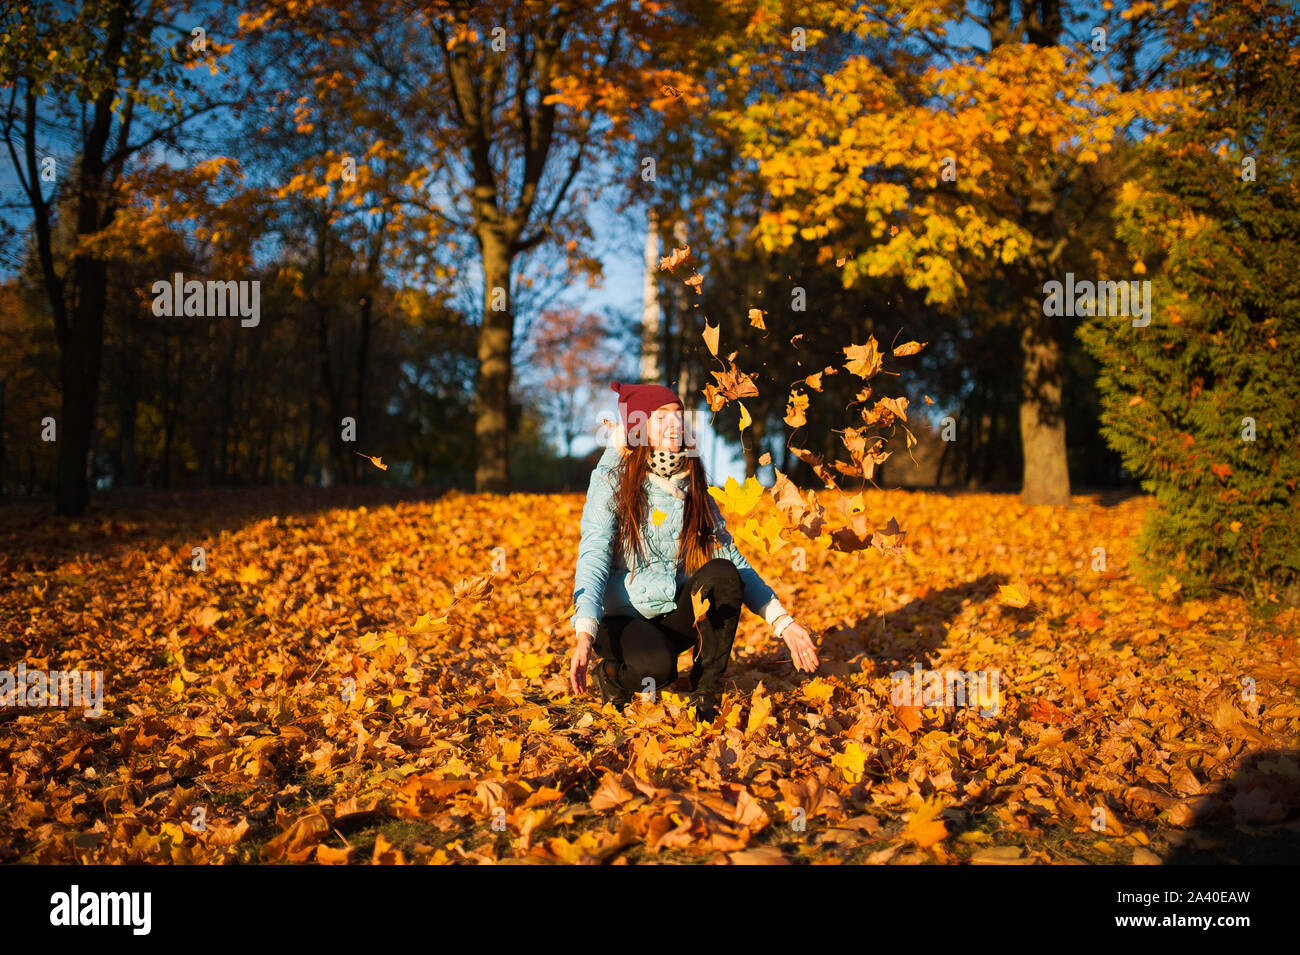 Happiness carefree leisure concept. Redhaired long hair woman relaxing in autumn park throwing leaves up in the air. Beautiful girl in orange forest f Stock Photo